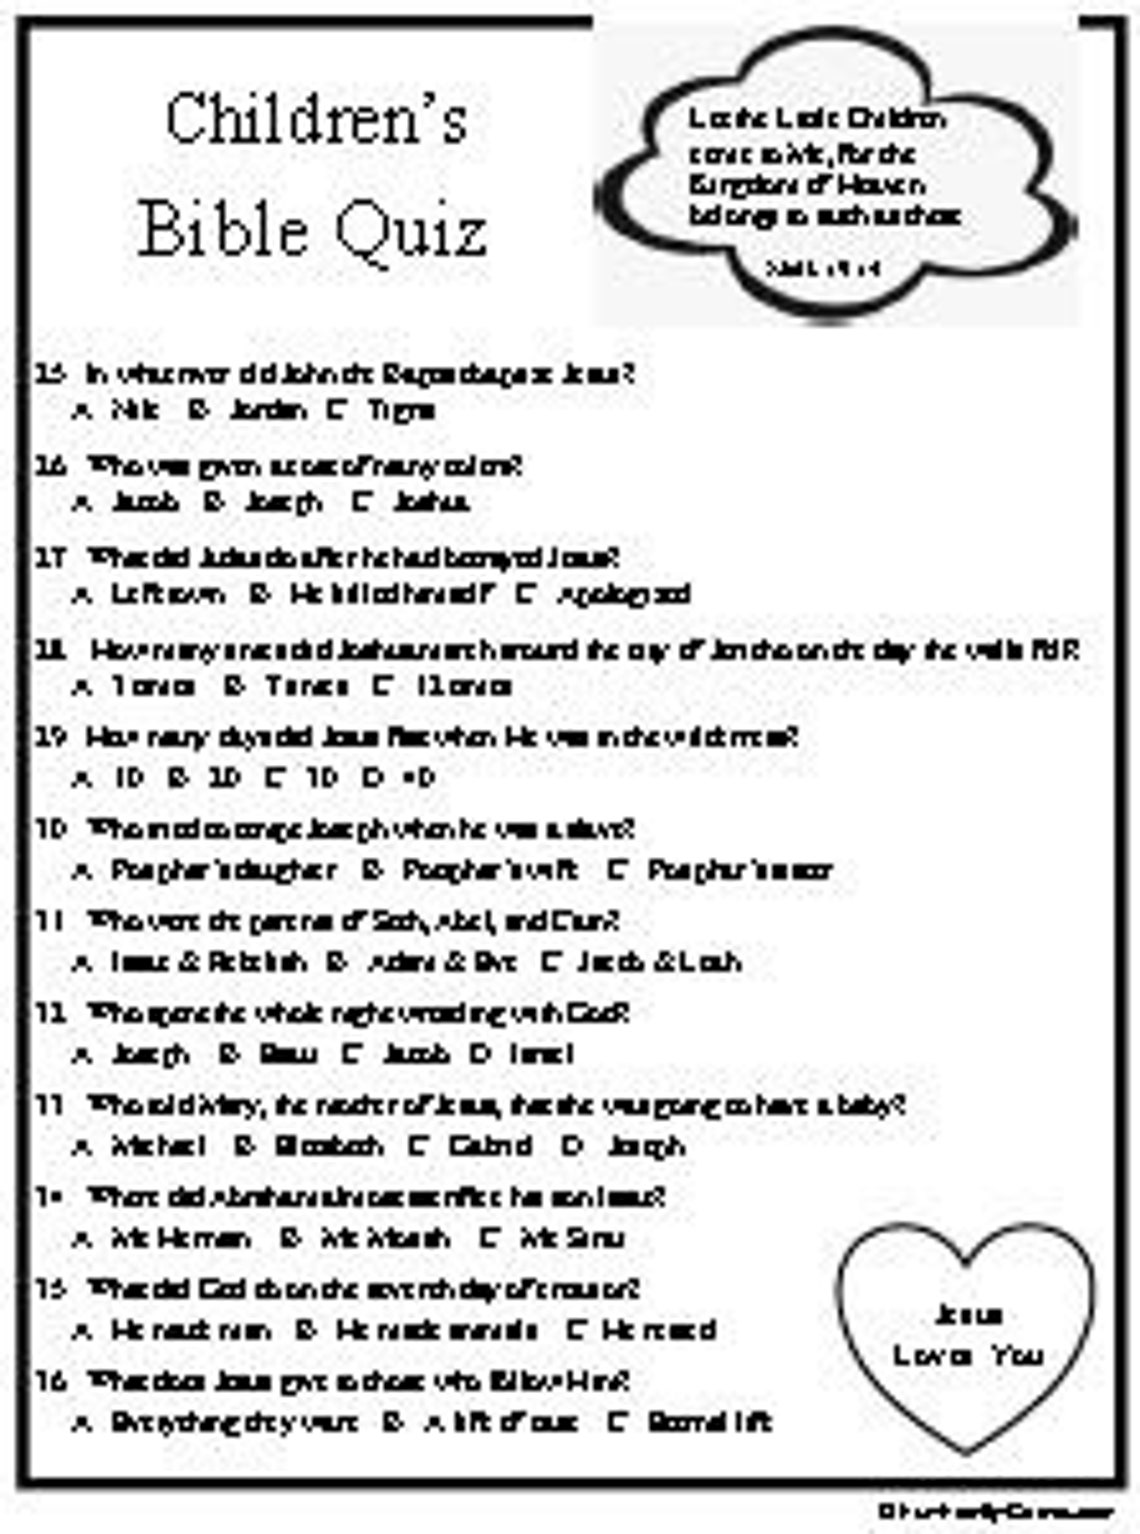 children-s-bible-quiz-is-a-multiple-choice-quiz-with-chapter-and-verse